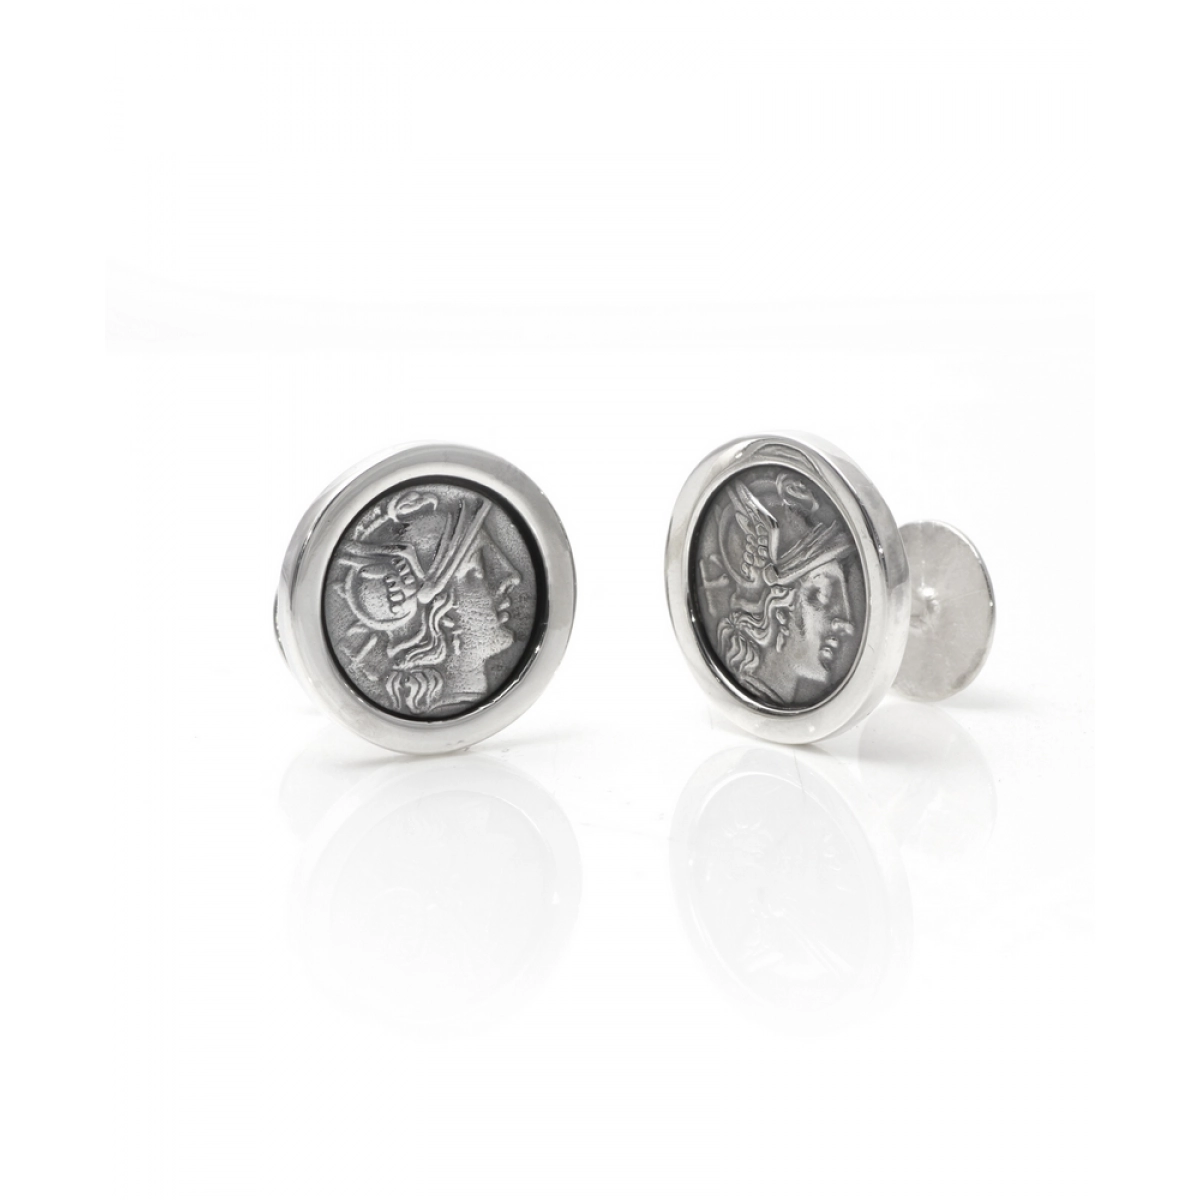 CUFFLINKS ARE STERLING SILVER, ROMAN COIN WITH SATIN FINISH AND BRIGHTNESS. CRESBER To Sara